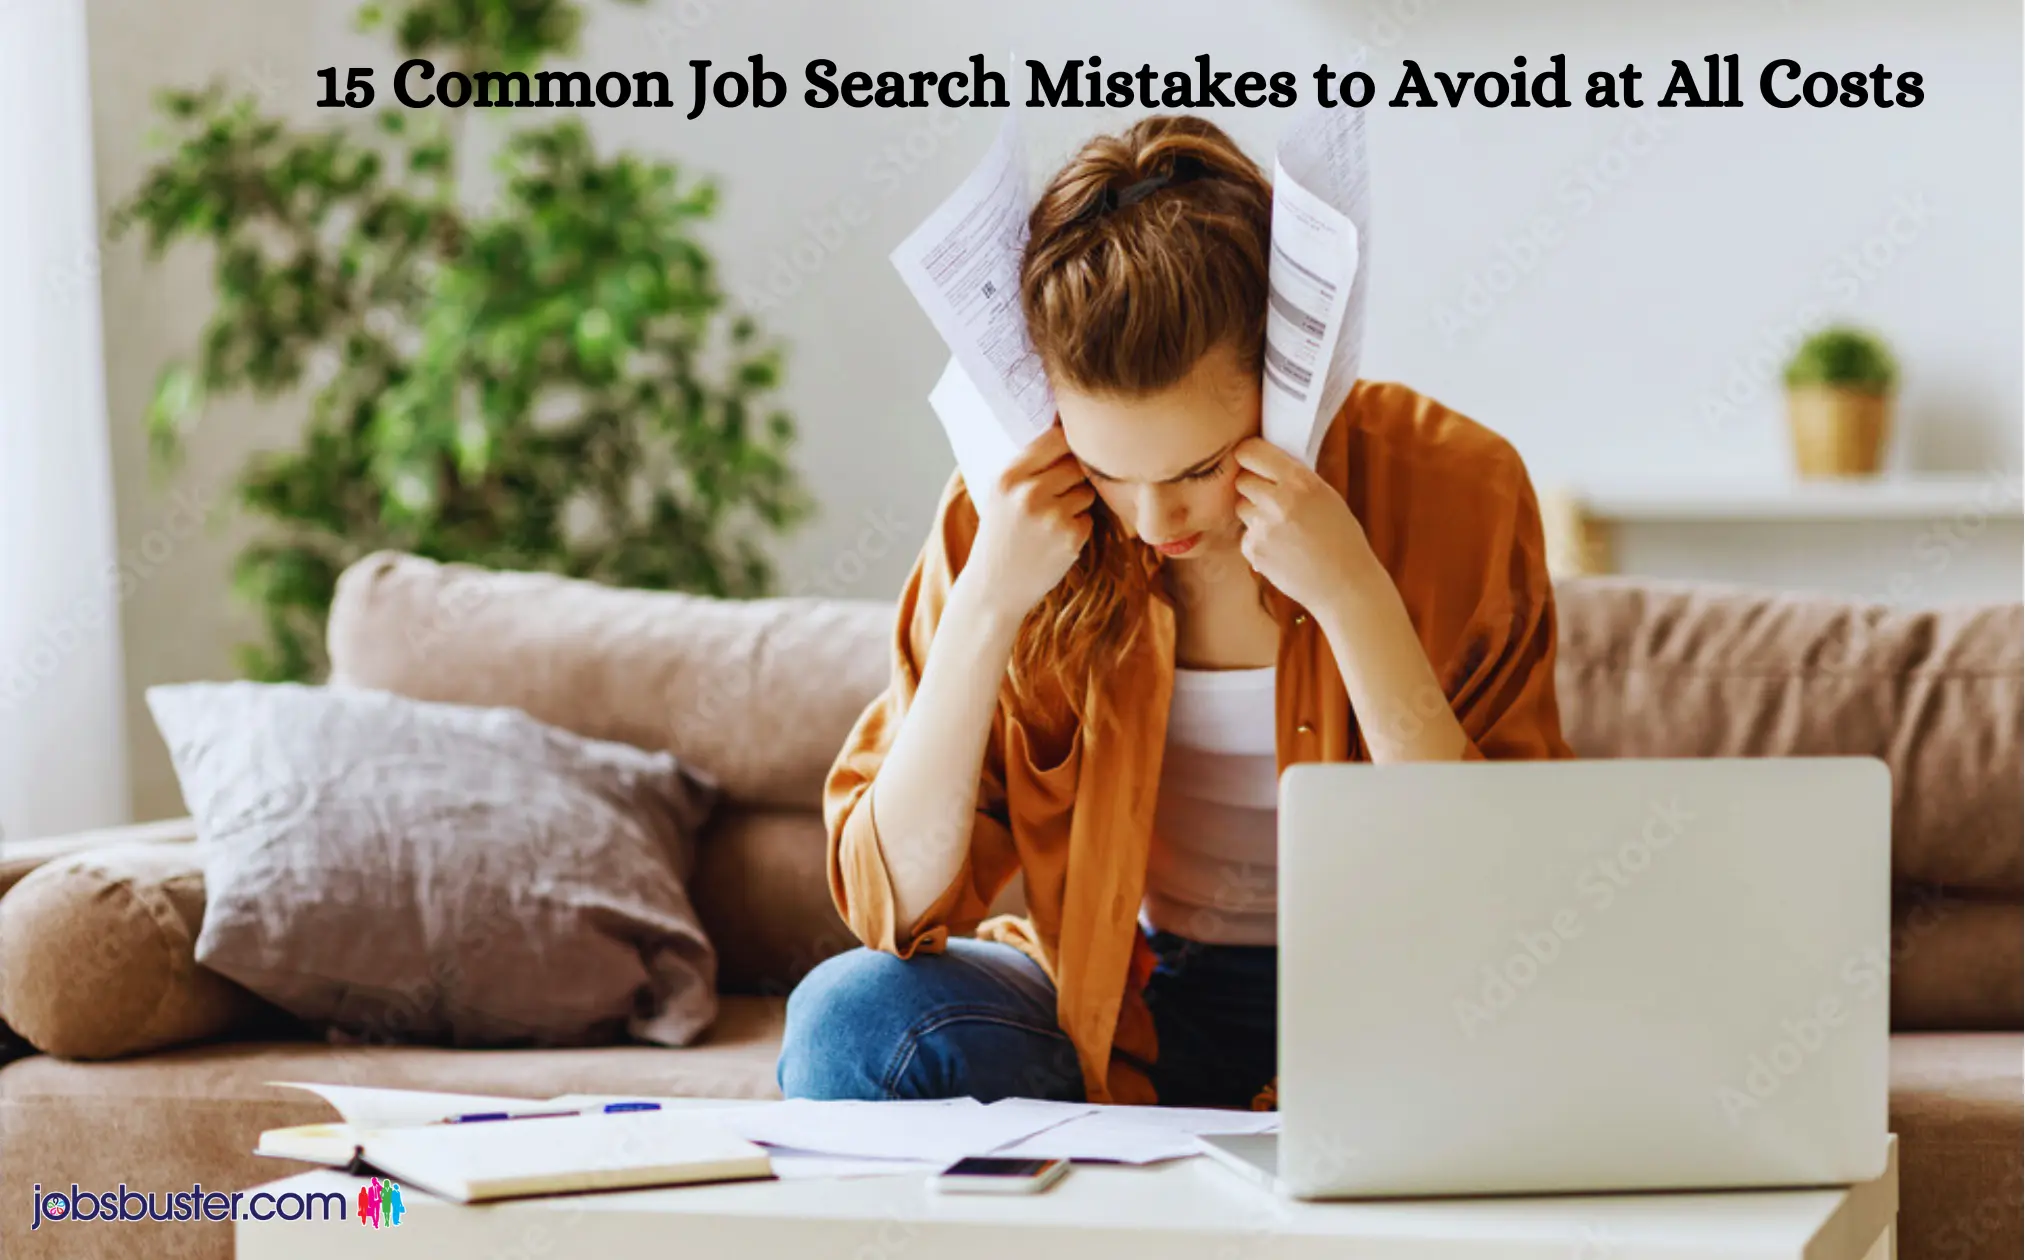 15 Common Job Search Mistakes to Avoid at All Costs